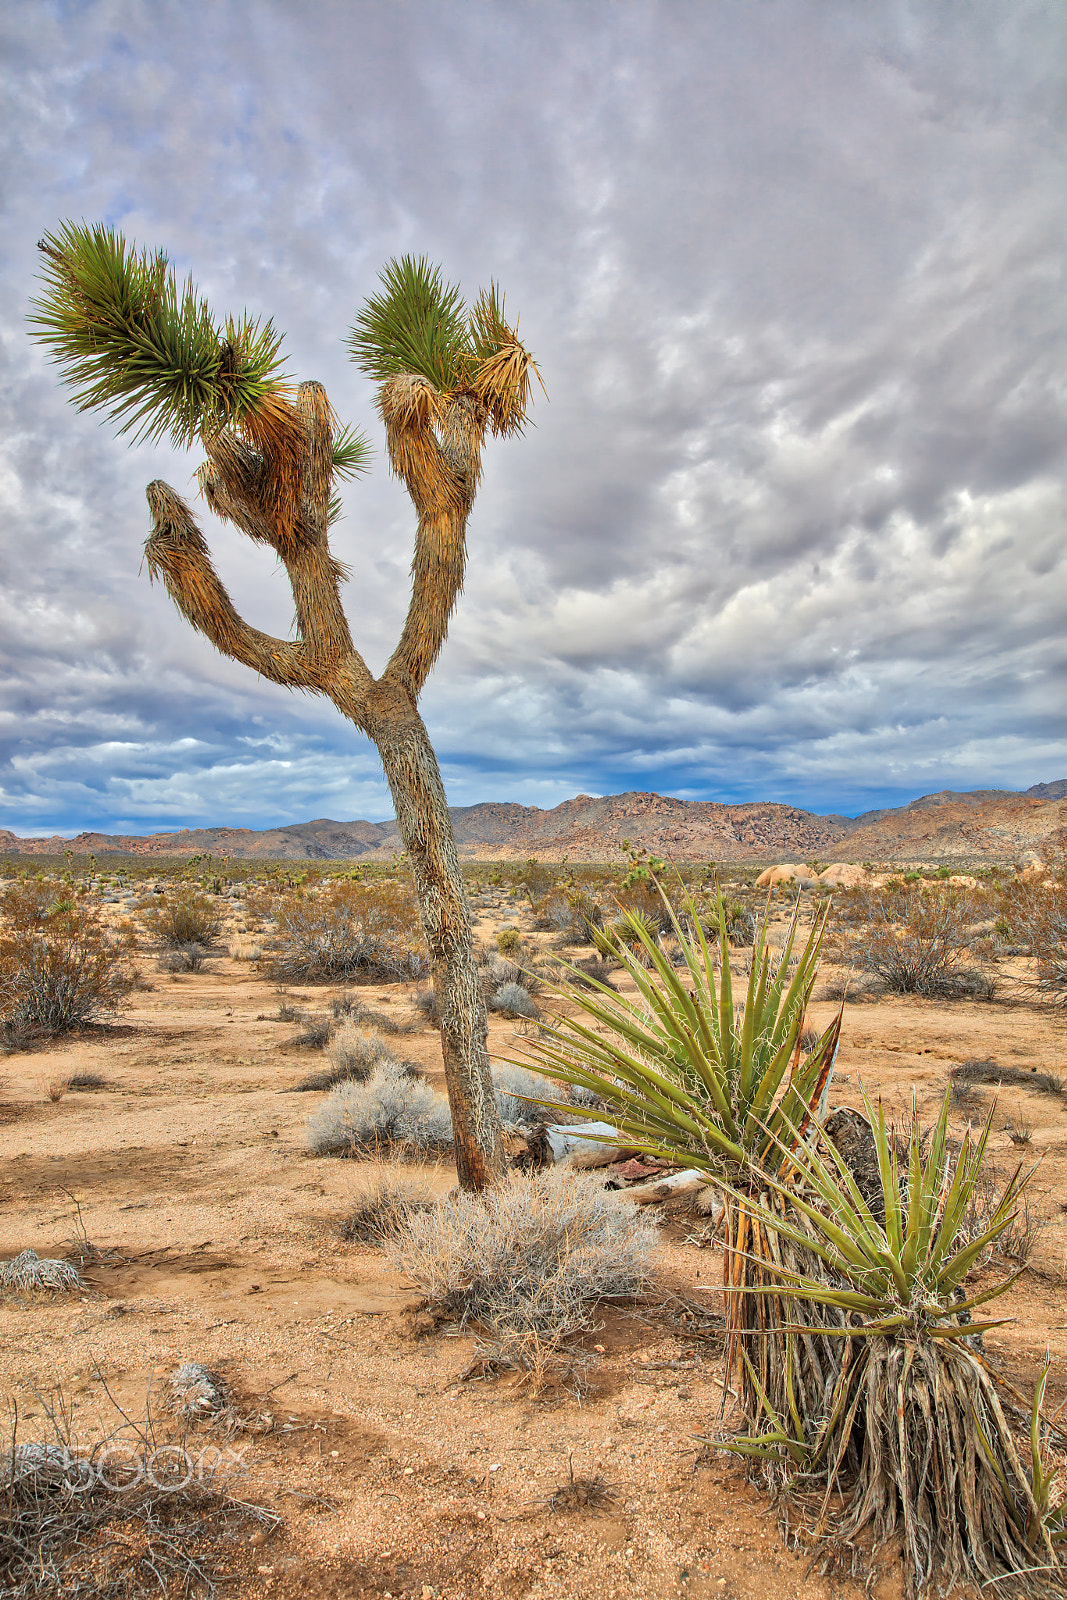 Canon EOS 5DS R + Sigma 24-105mm f/4 DG OS HSM | A sample photo. Joshua tree photography